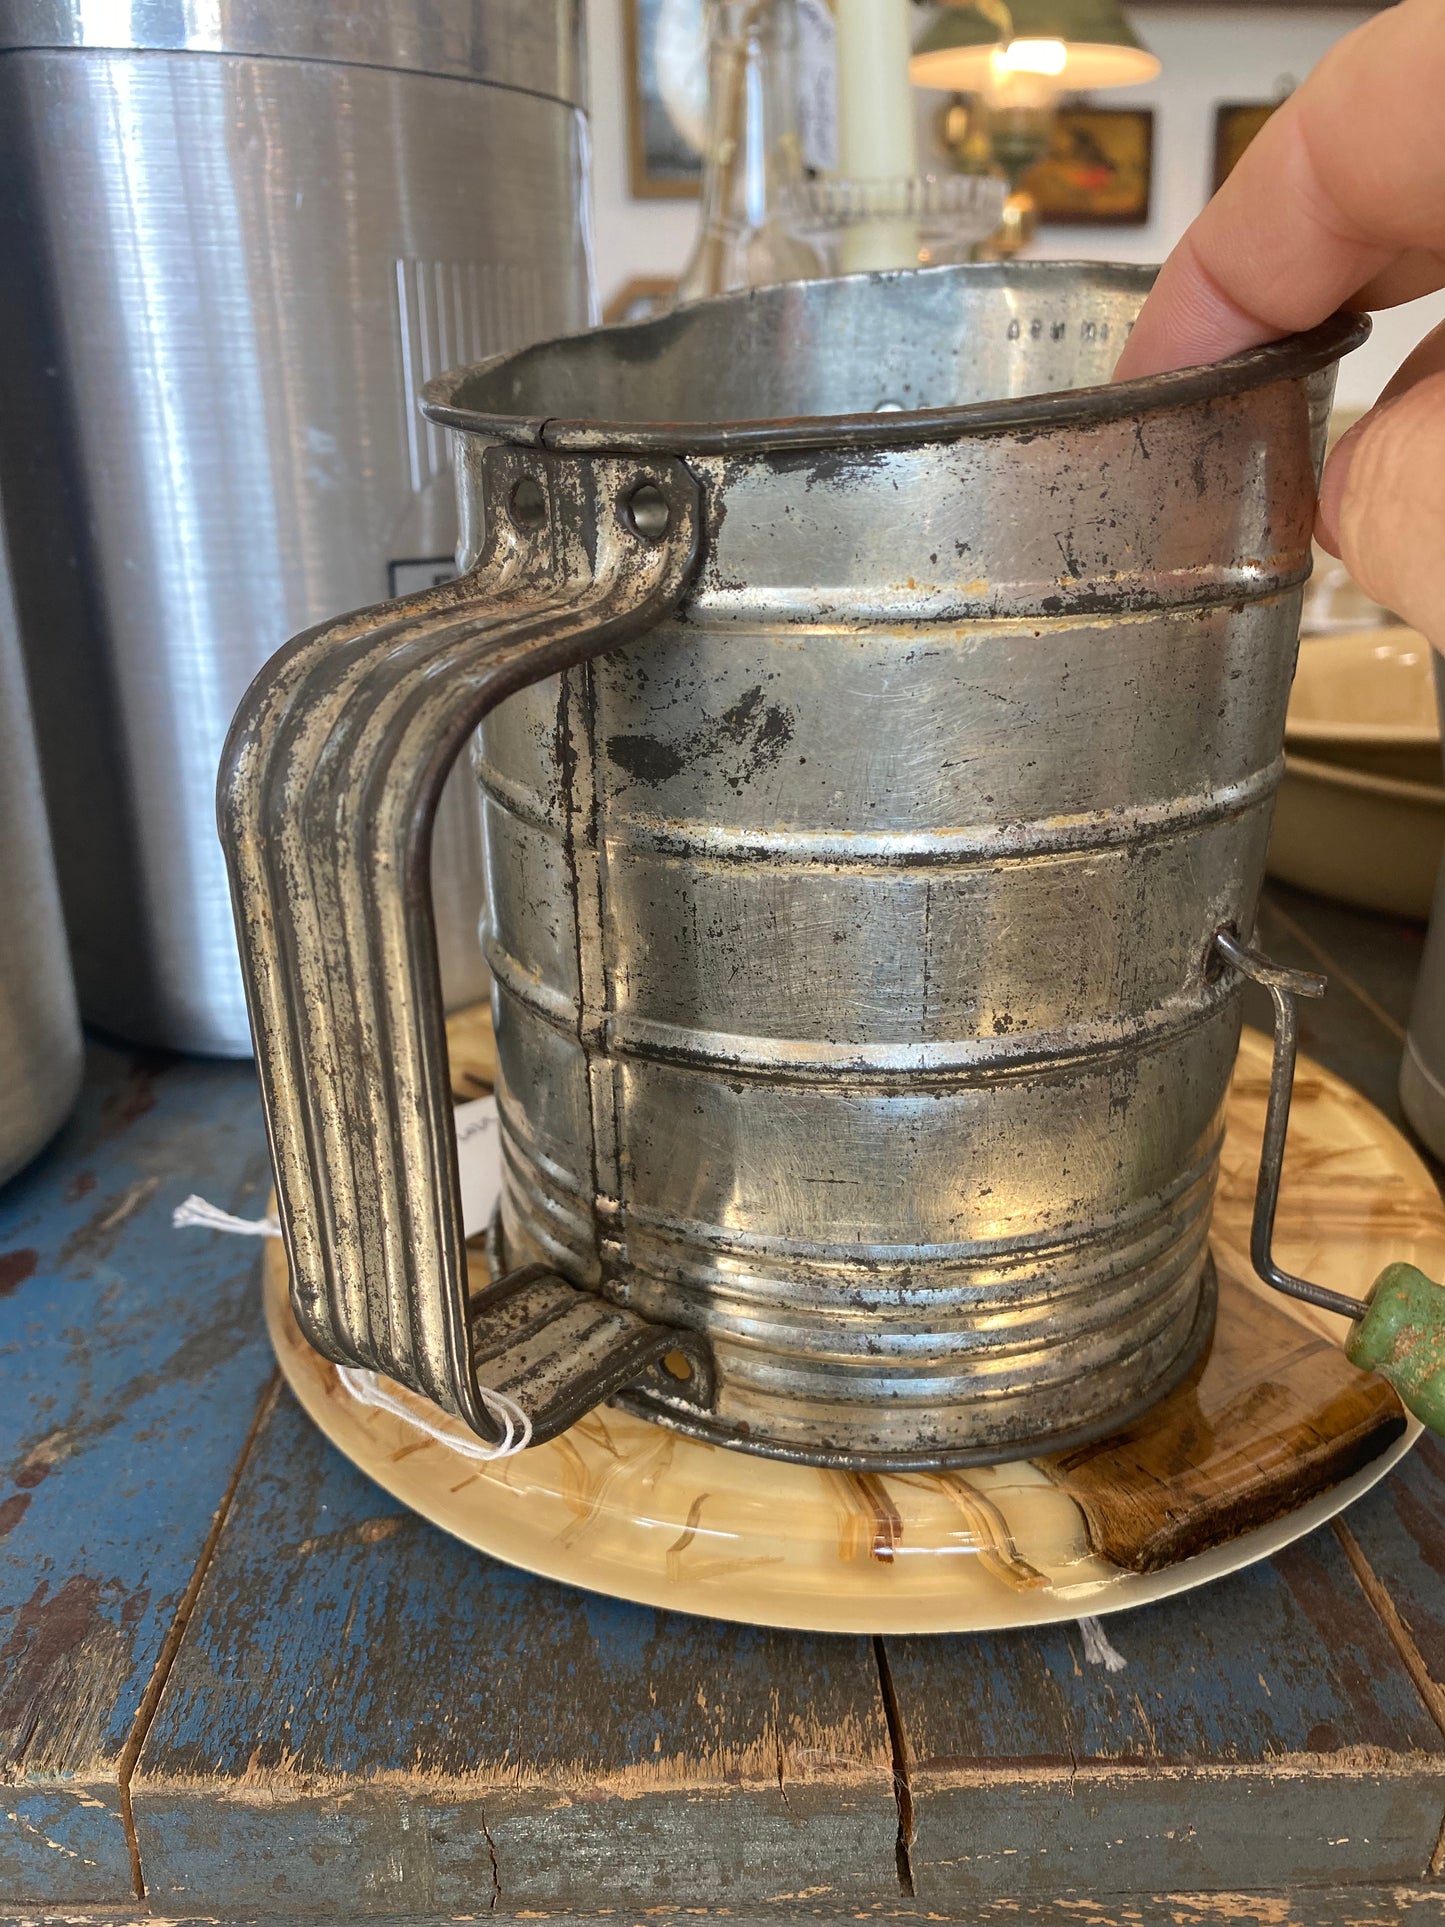 Bromwell’s Flour Sifter